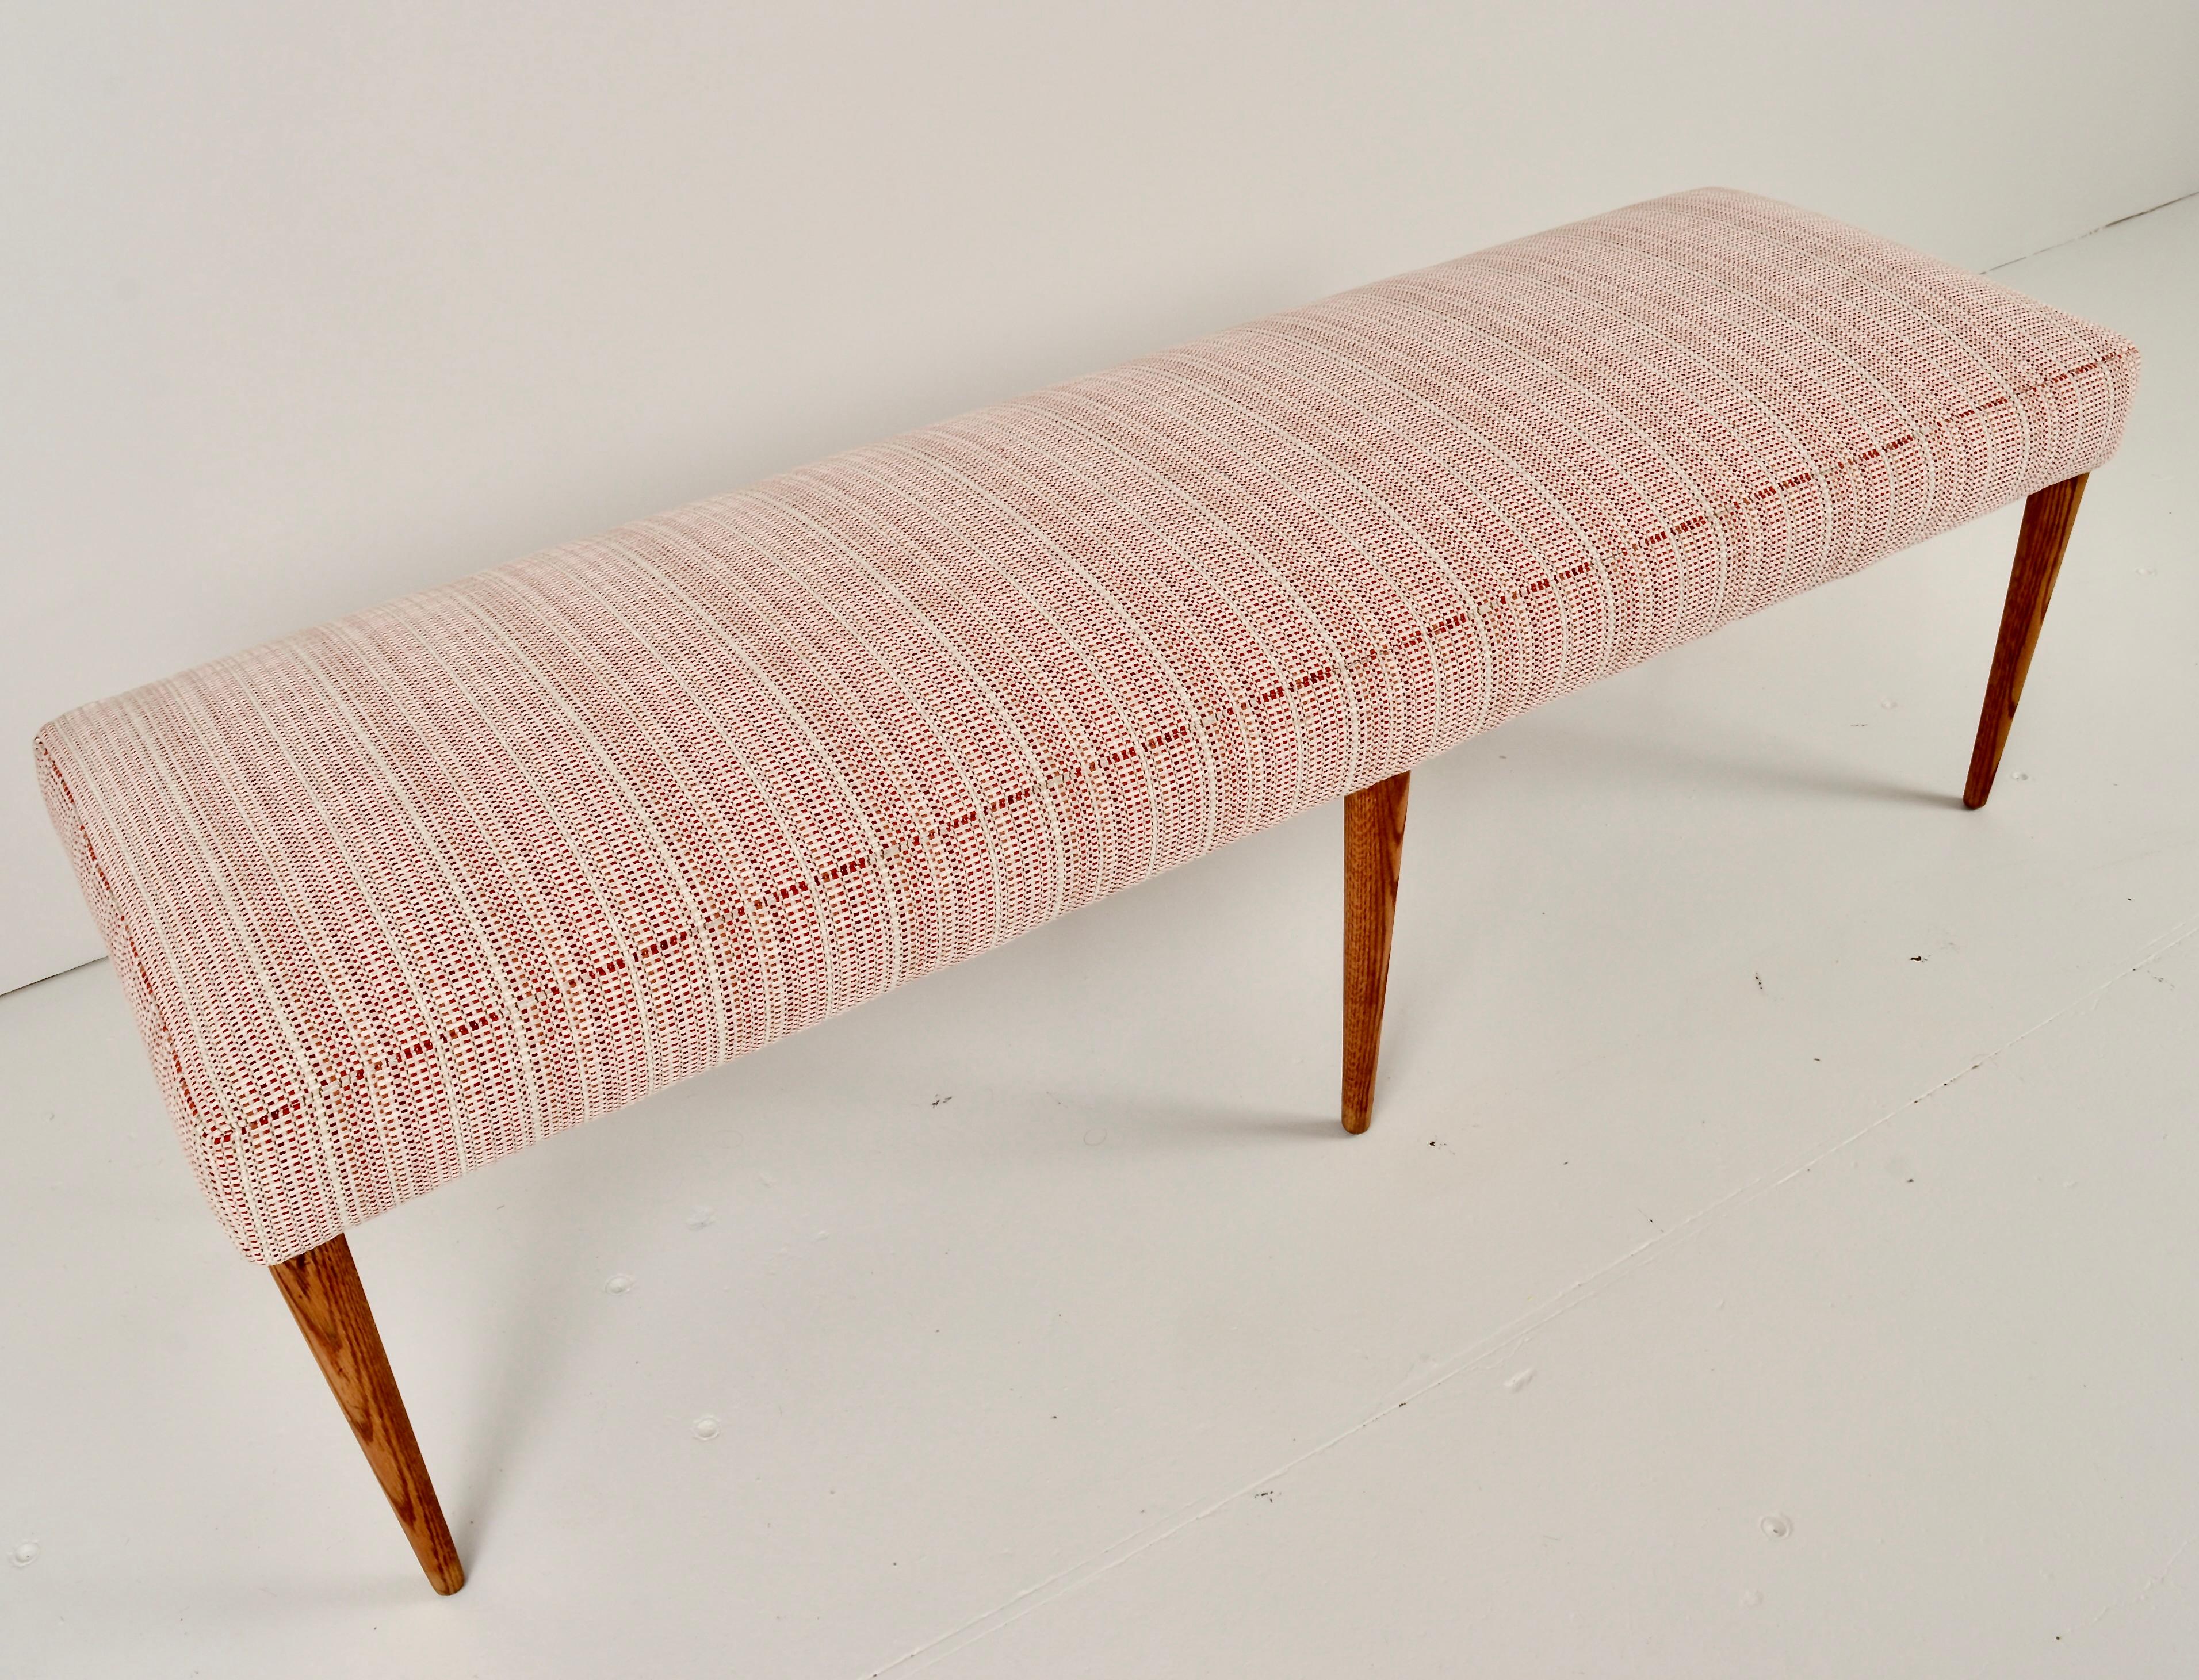 Six  wonderfully tapered oak legs on this long bench. At 60 inches a very useful size. This vintage bench has been completely reupholstered in a nubby striped fabric in pink and rose tones. Very sturdy and in excellent condition.